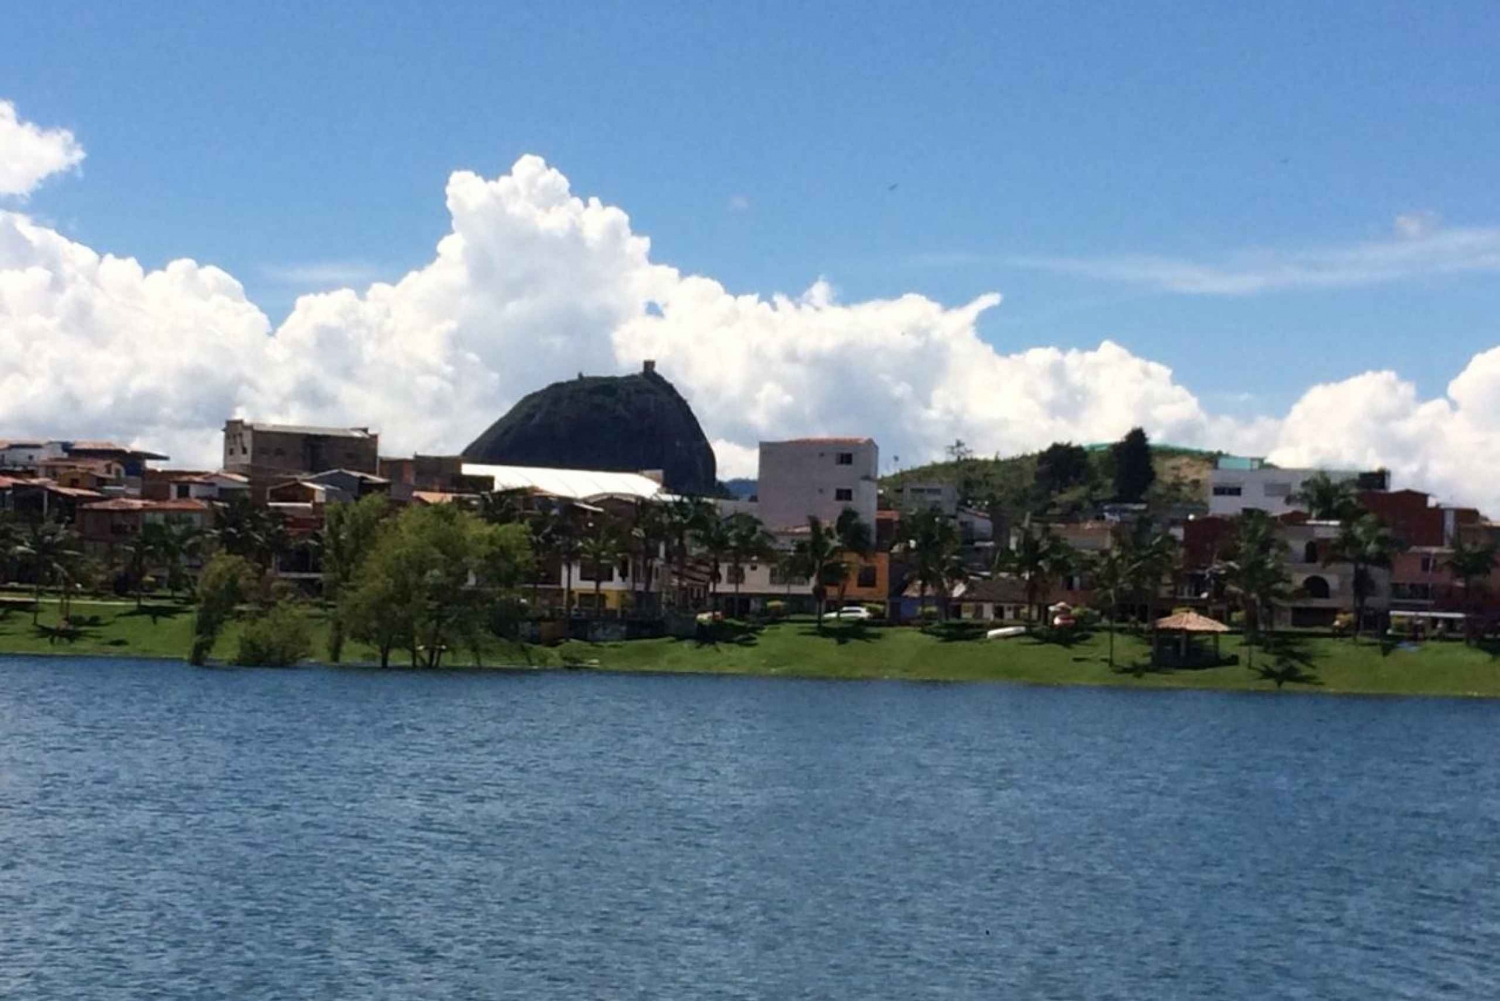 From Medellin: Private Guatape Car Tour with Coffee Tour